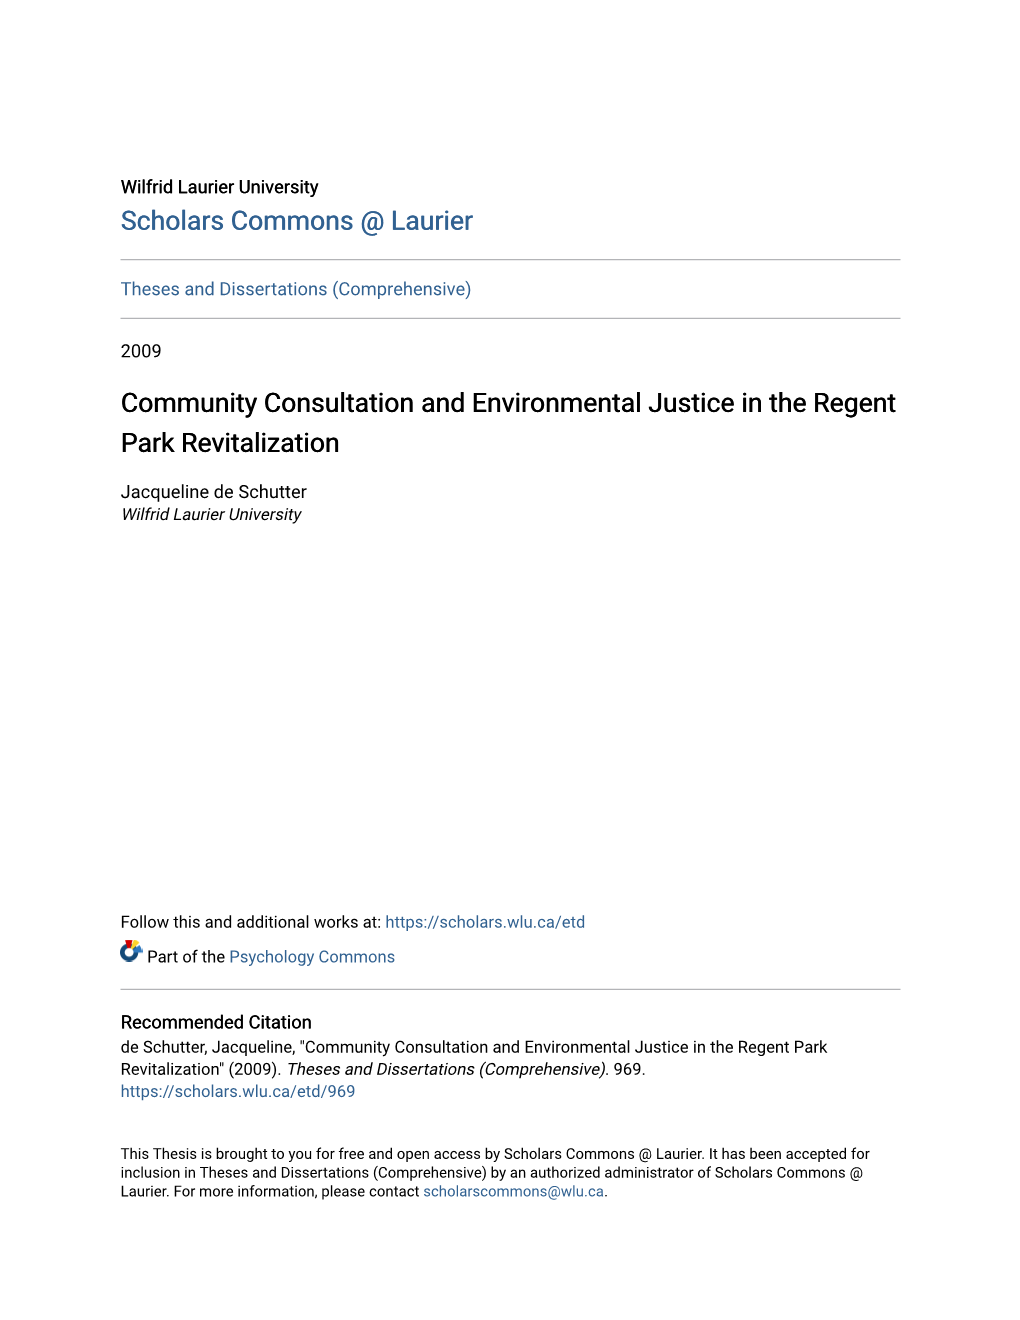 Community Consultation and Environmental Justice in the Regent Park Revitalization